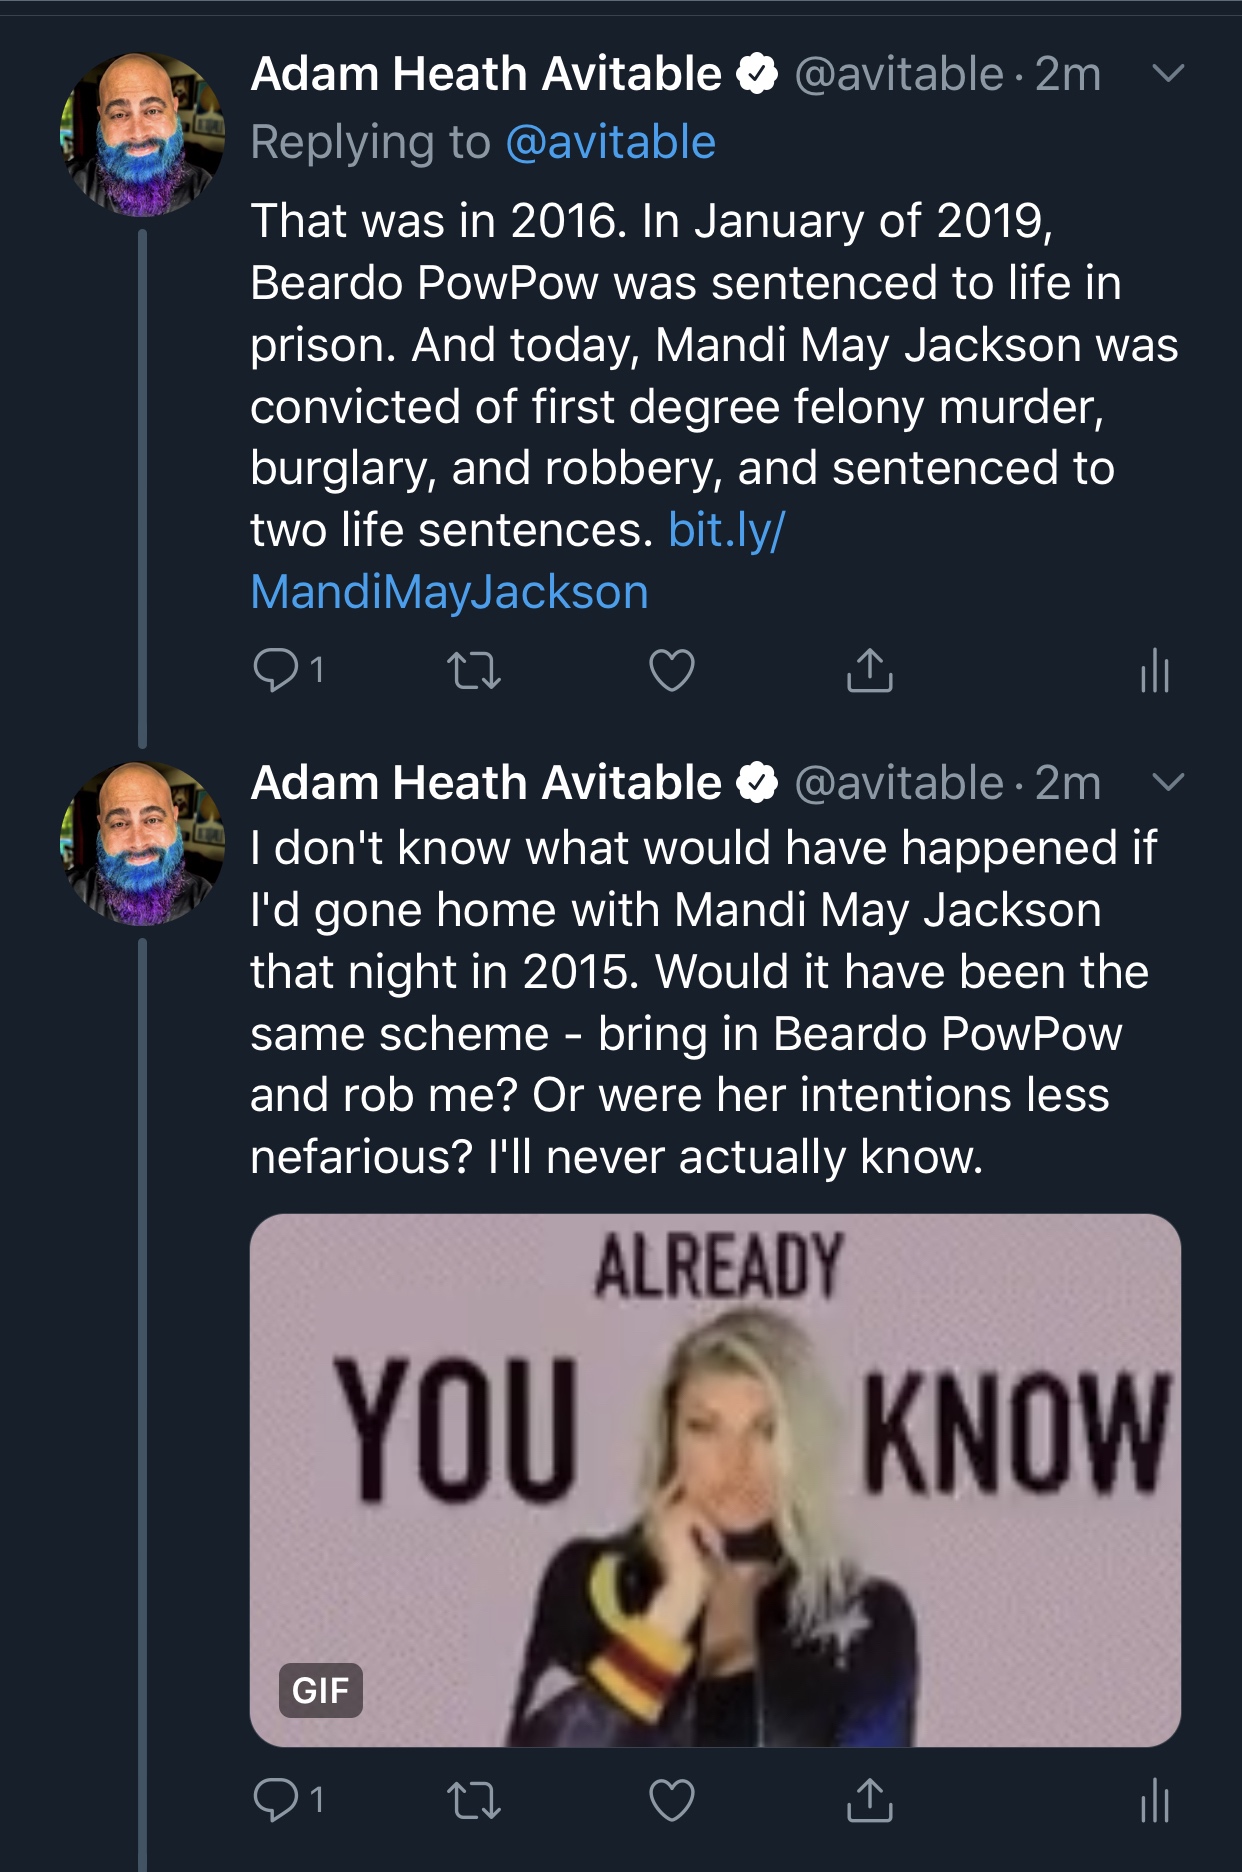 screenshot - Adam Heath Avitable 2mV That was in 2016. In January of 2019, Beardo PowPow was sentenced to life in prison. And today, Mandi May Jackson was convicted of first degree felony murder, burglary, and robbery, and sentenced to two life sentences.